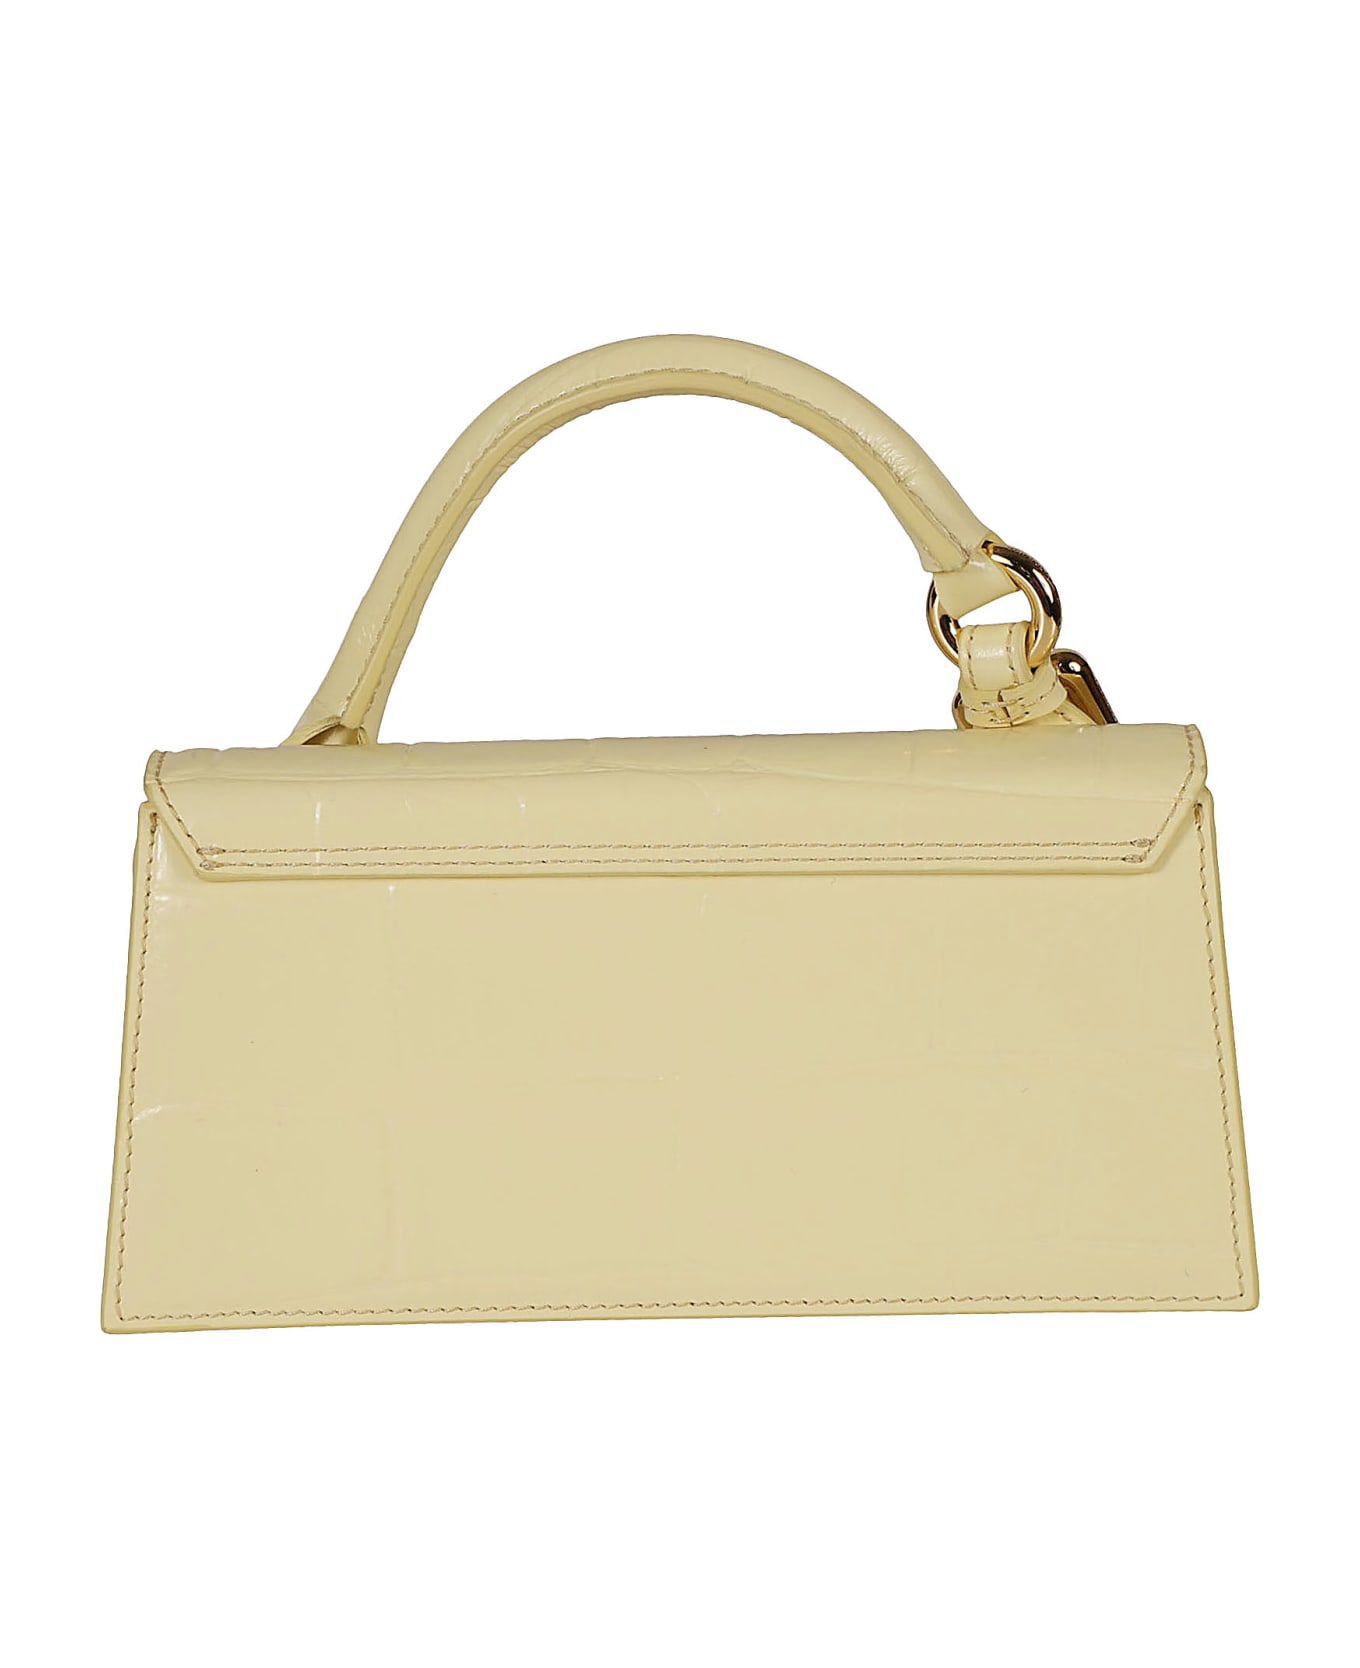 Jacquemus Le Chiquito Long Tote - Pale Yellow